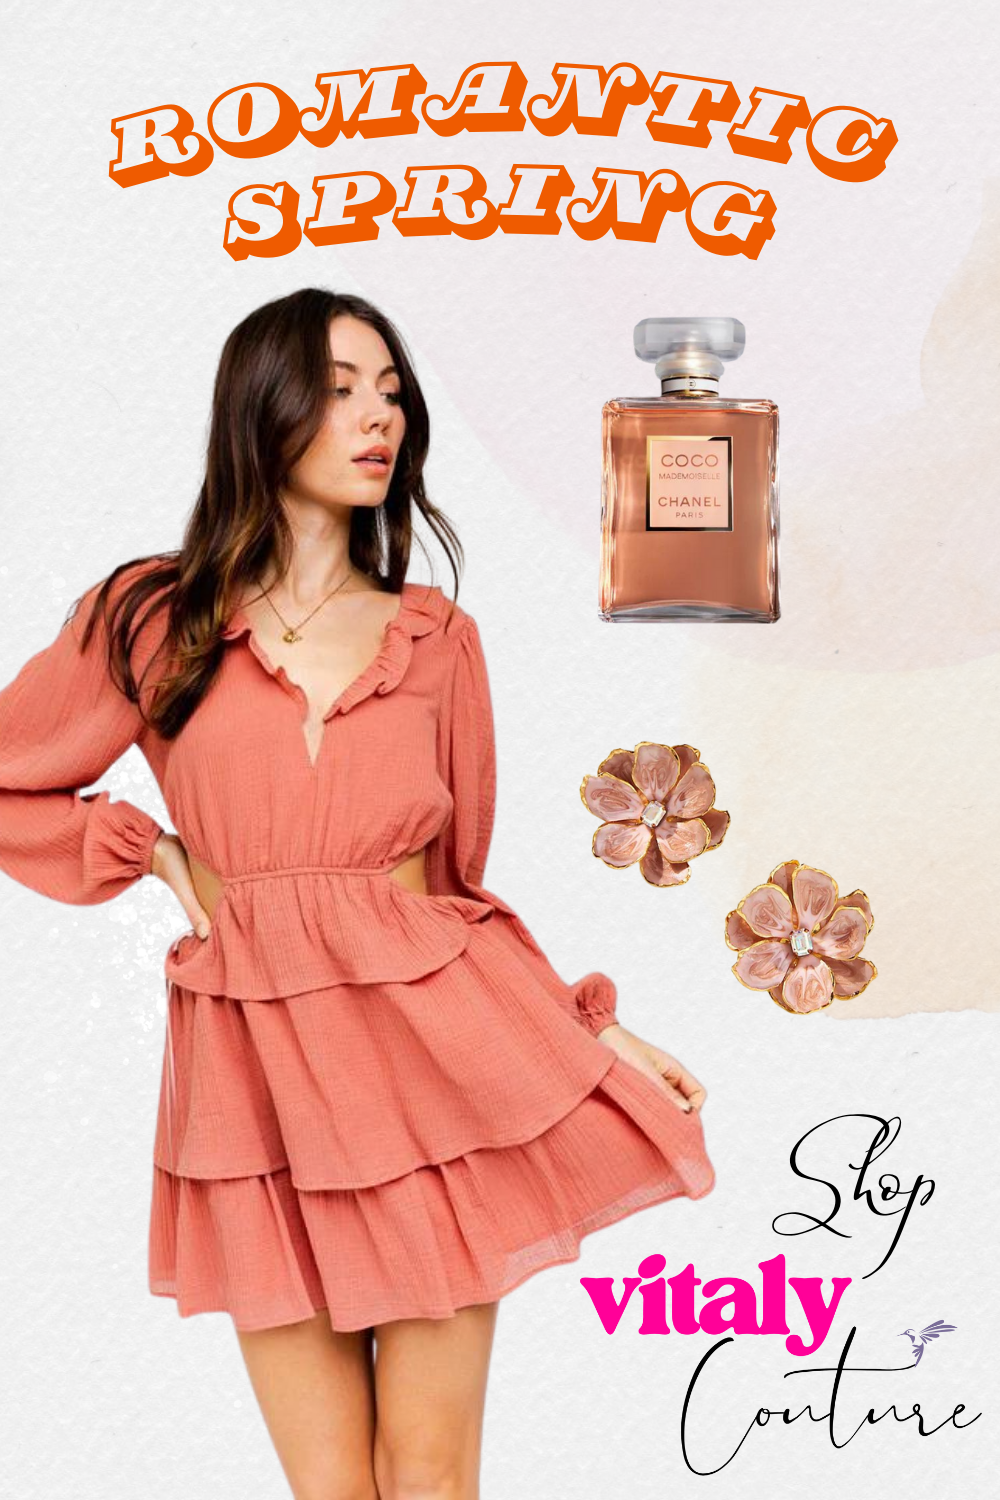 Spring Outfits: A Romantic Spring Look with Irresistible Orange Charm!